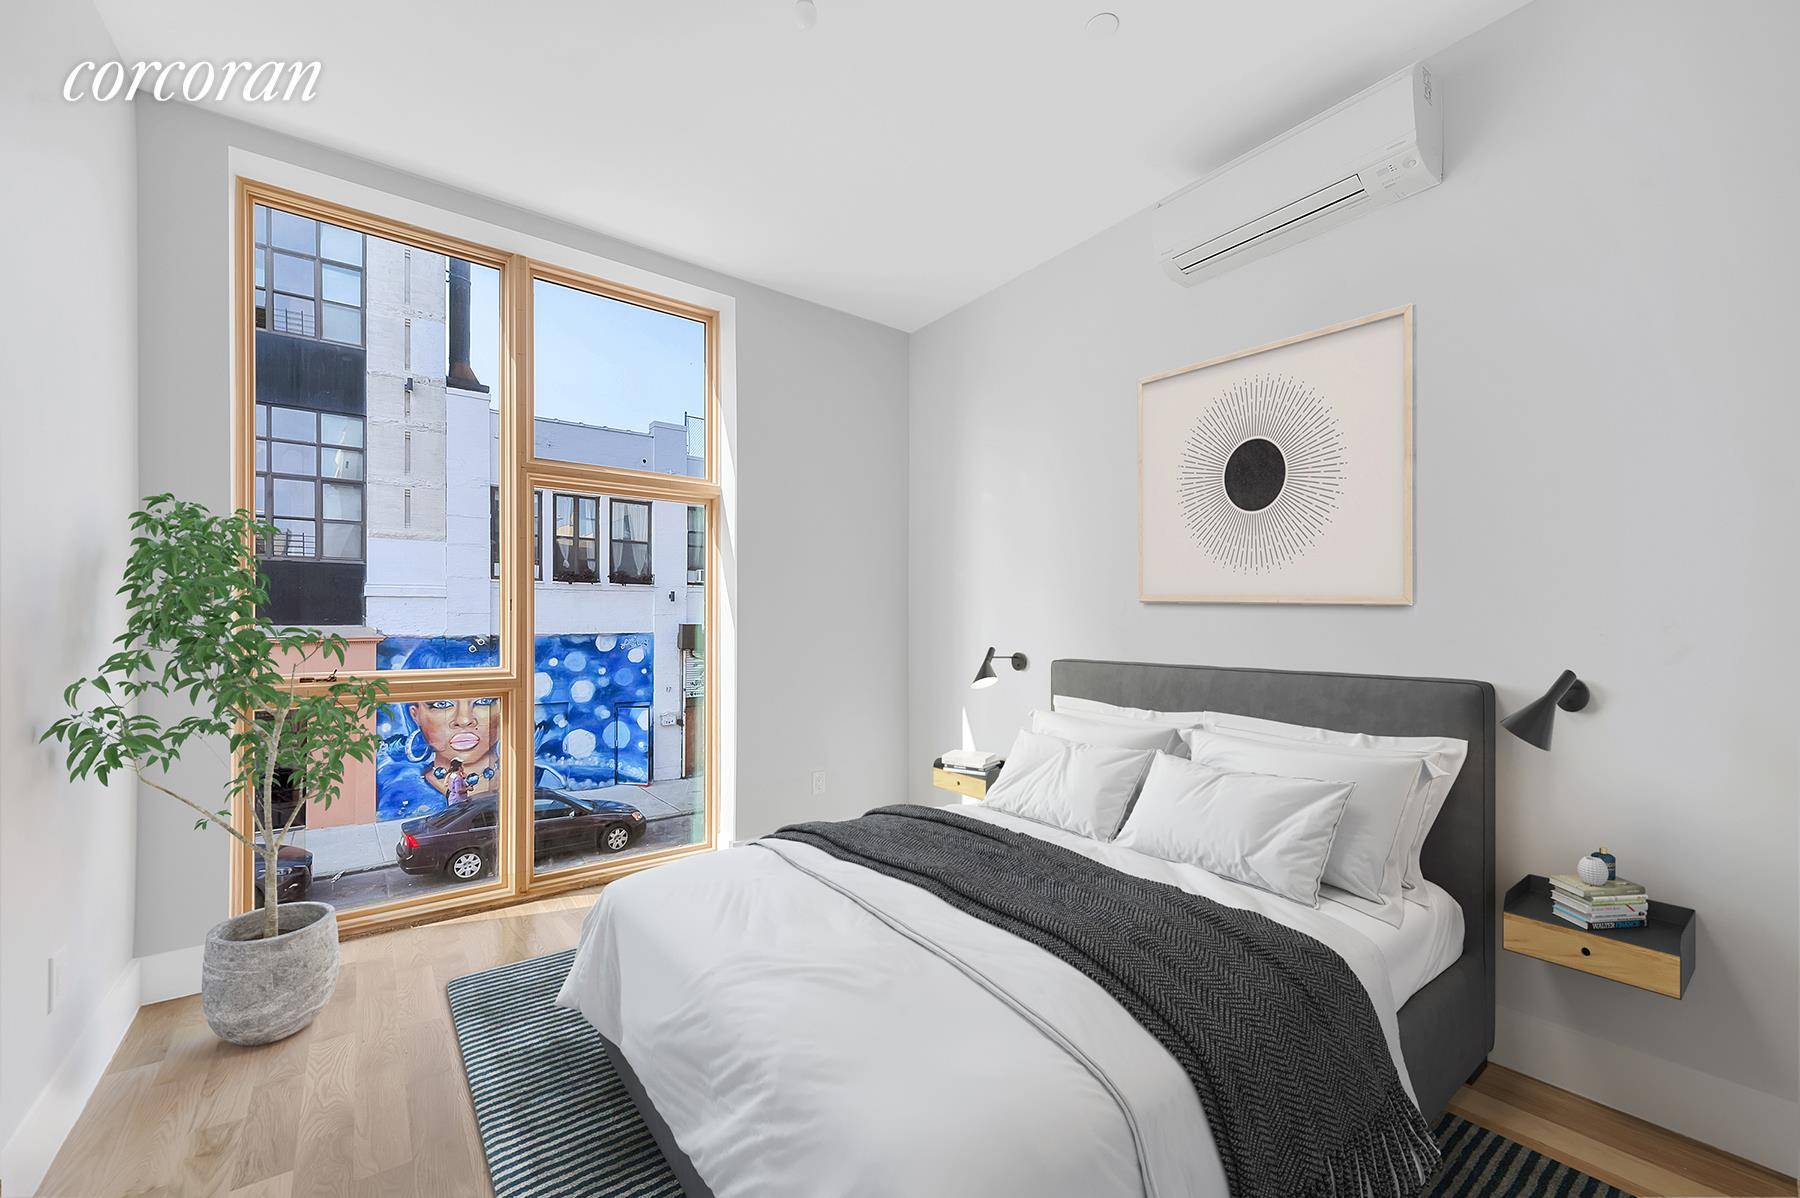 Welcome to 12 Lawton Street, a newly built seven unit condominium in the heart of Bushwick, offering a combination of 1 and 2 bedroom layouts.